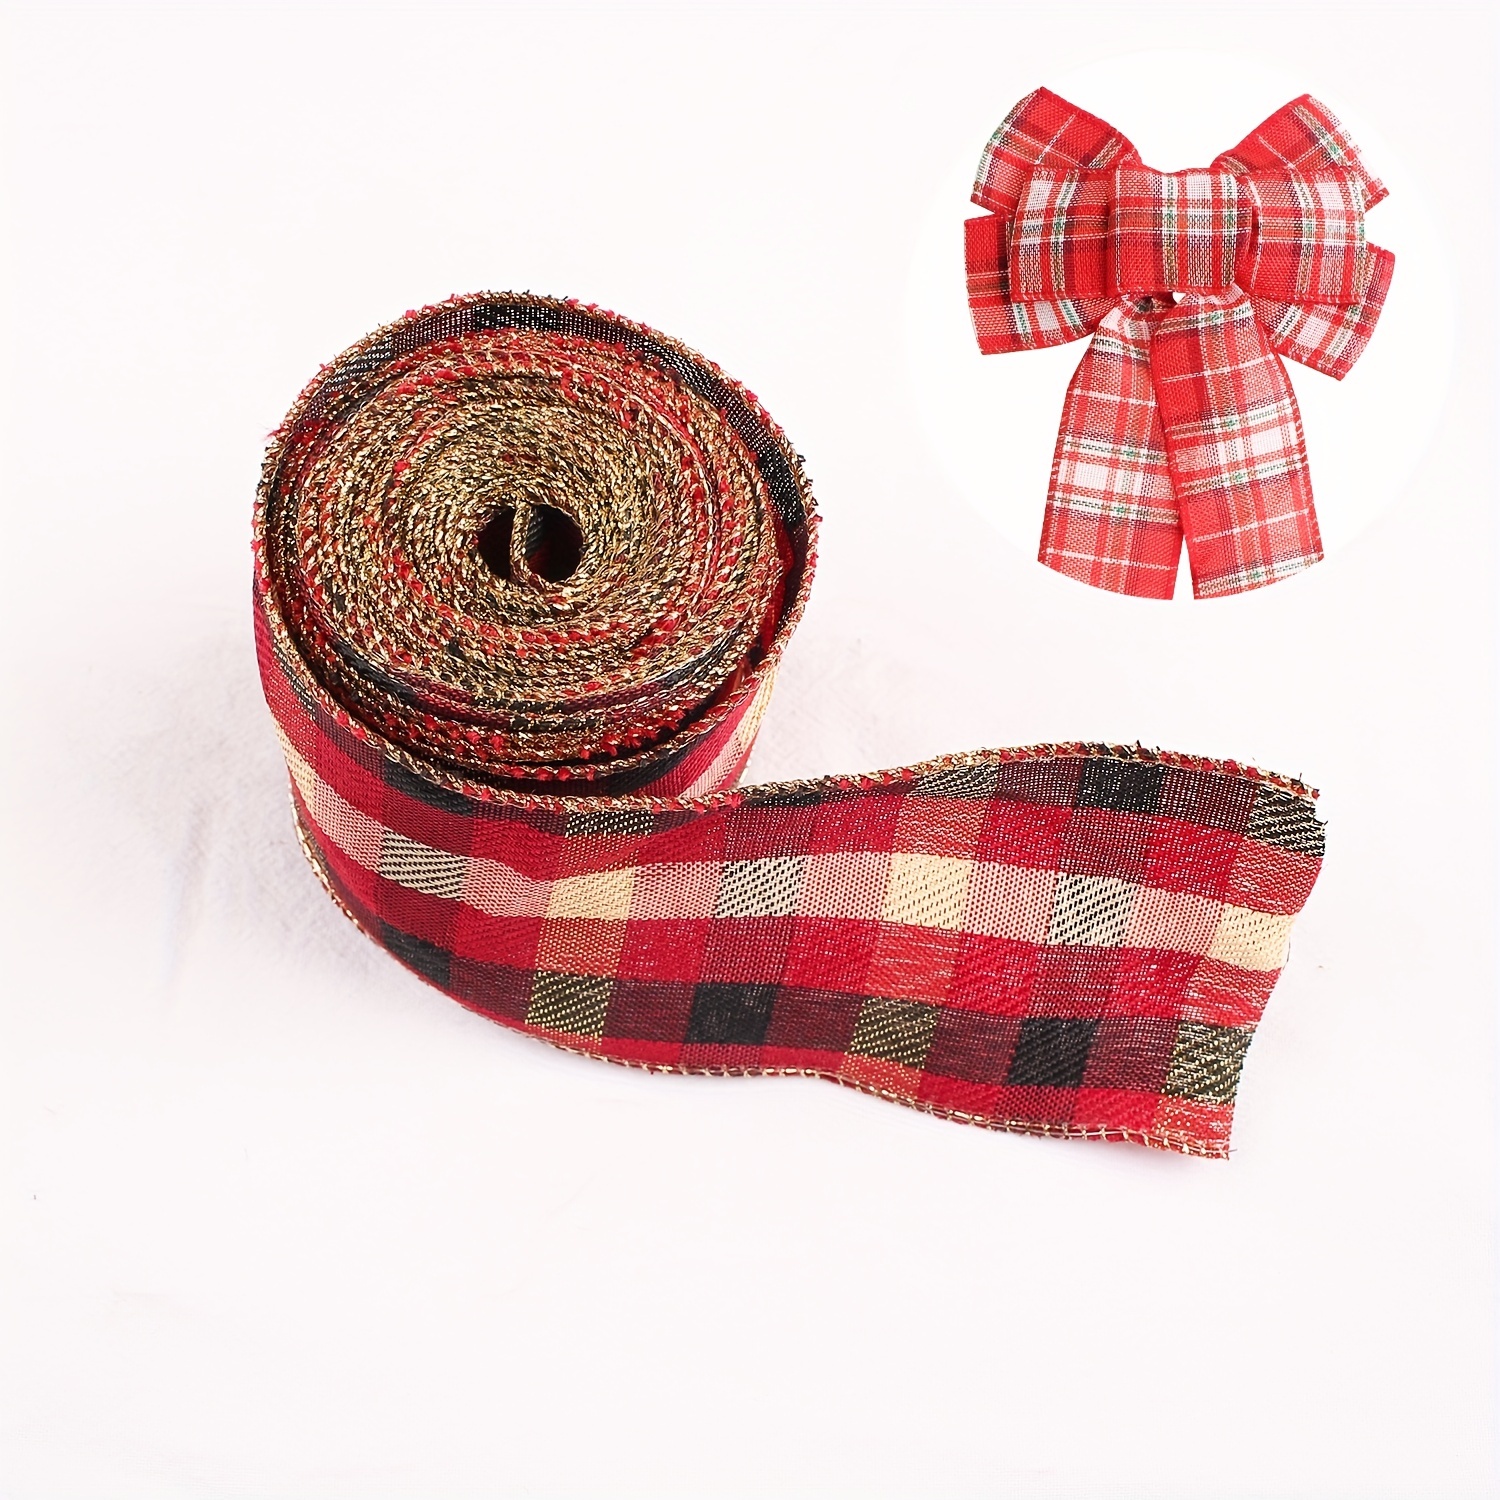 Micomon 1 Inch Red and White Woven Edge Gingham Ribbon 25 Yards Each Roll  100% Polyester (1, red)